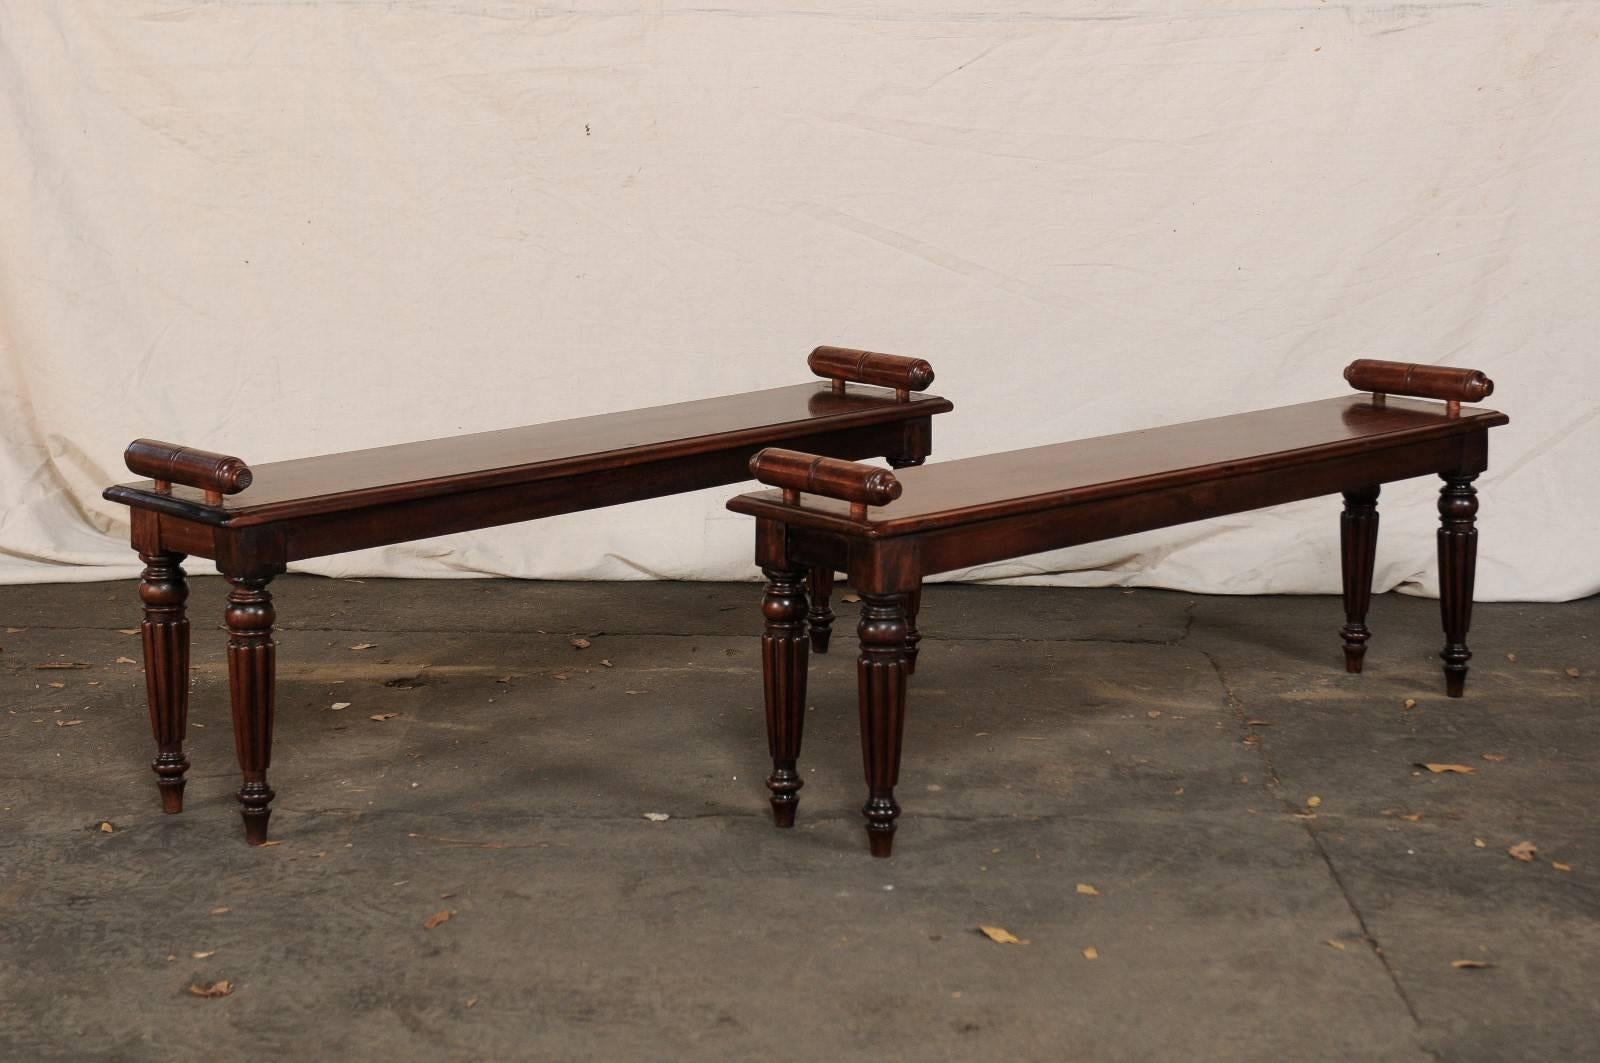 Pair of 19th century English Regency style hall benches.